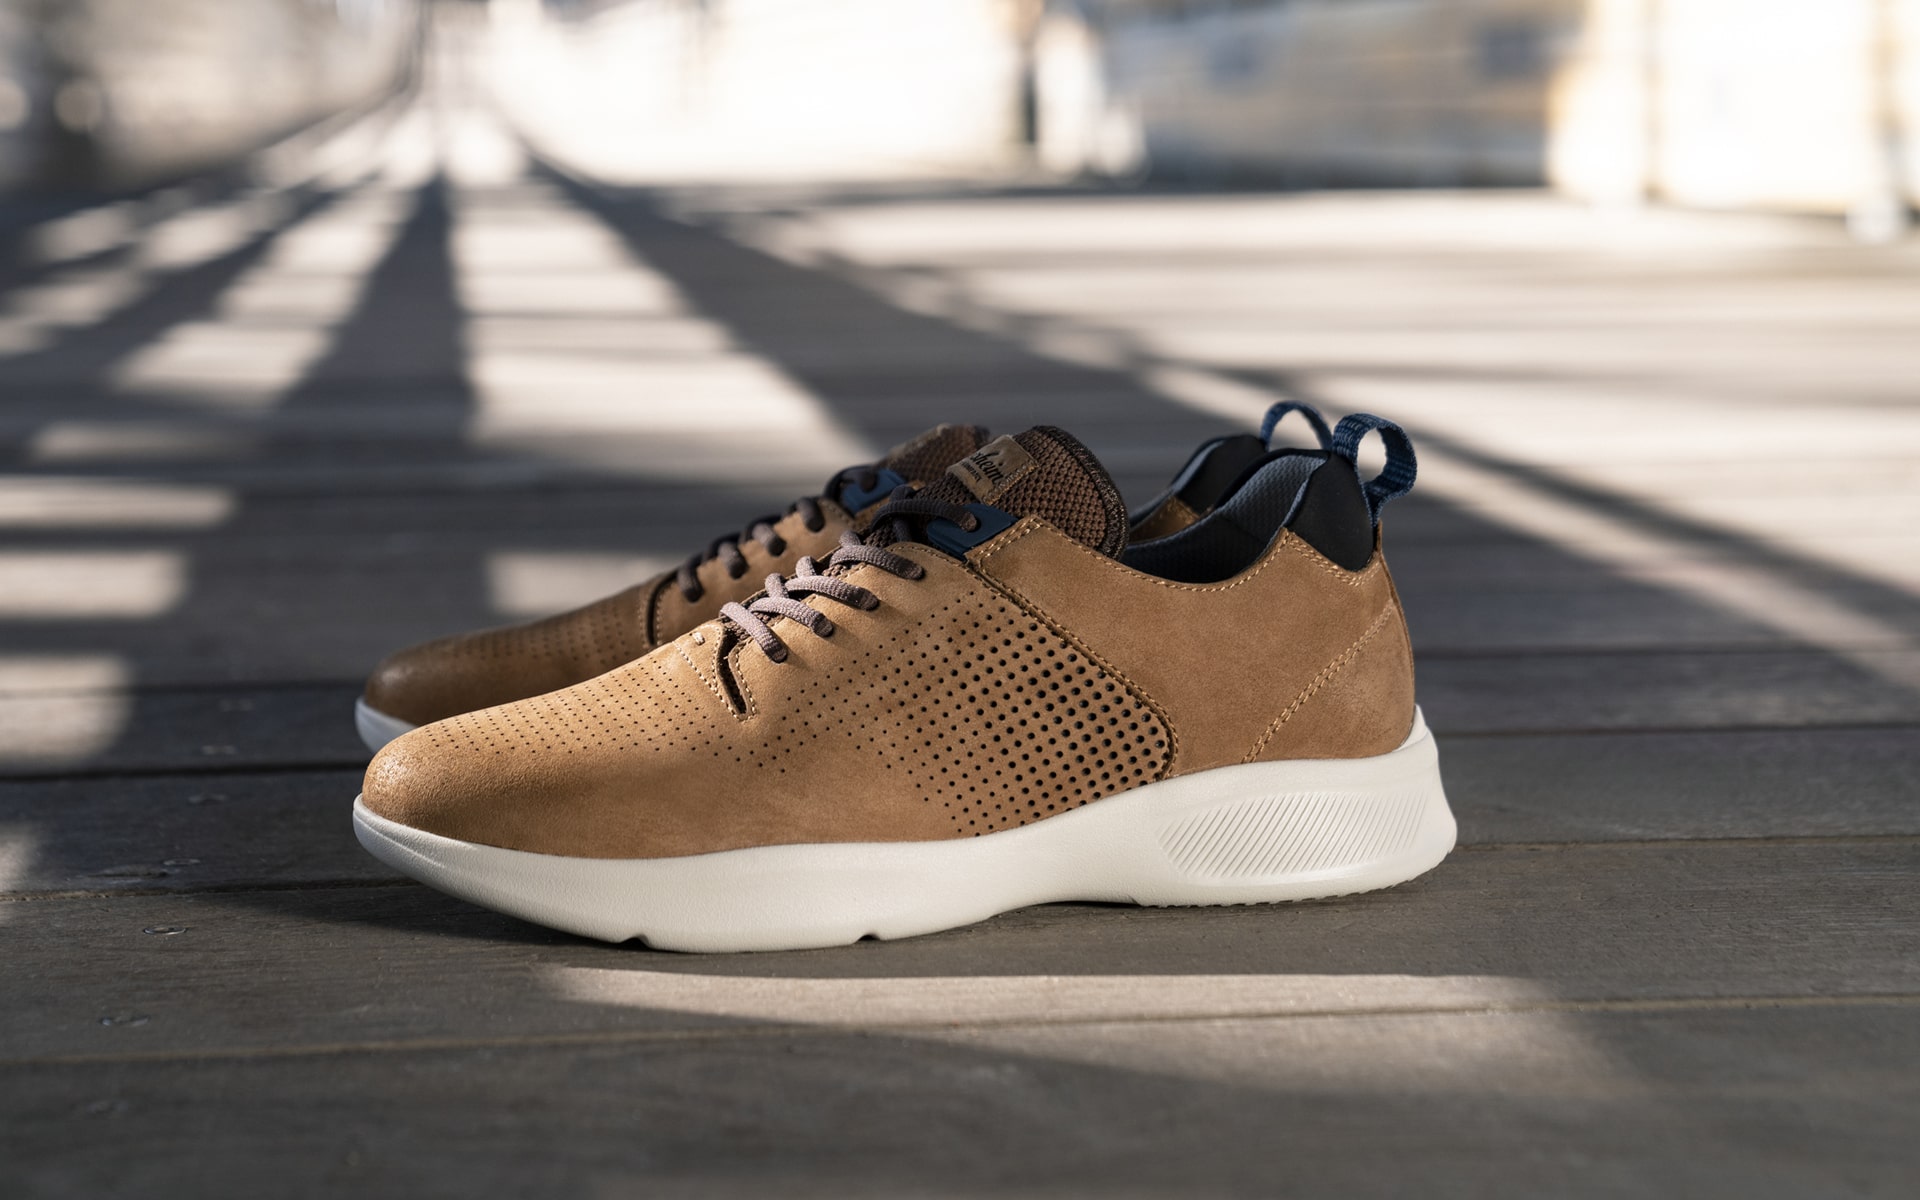 Click to shop the Studio. Image features the Studio sneaker in tan.